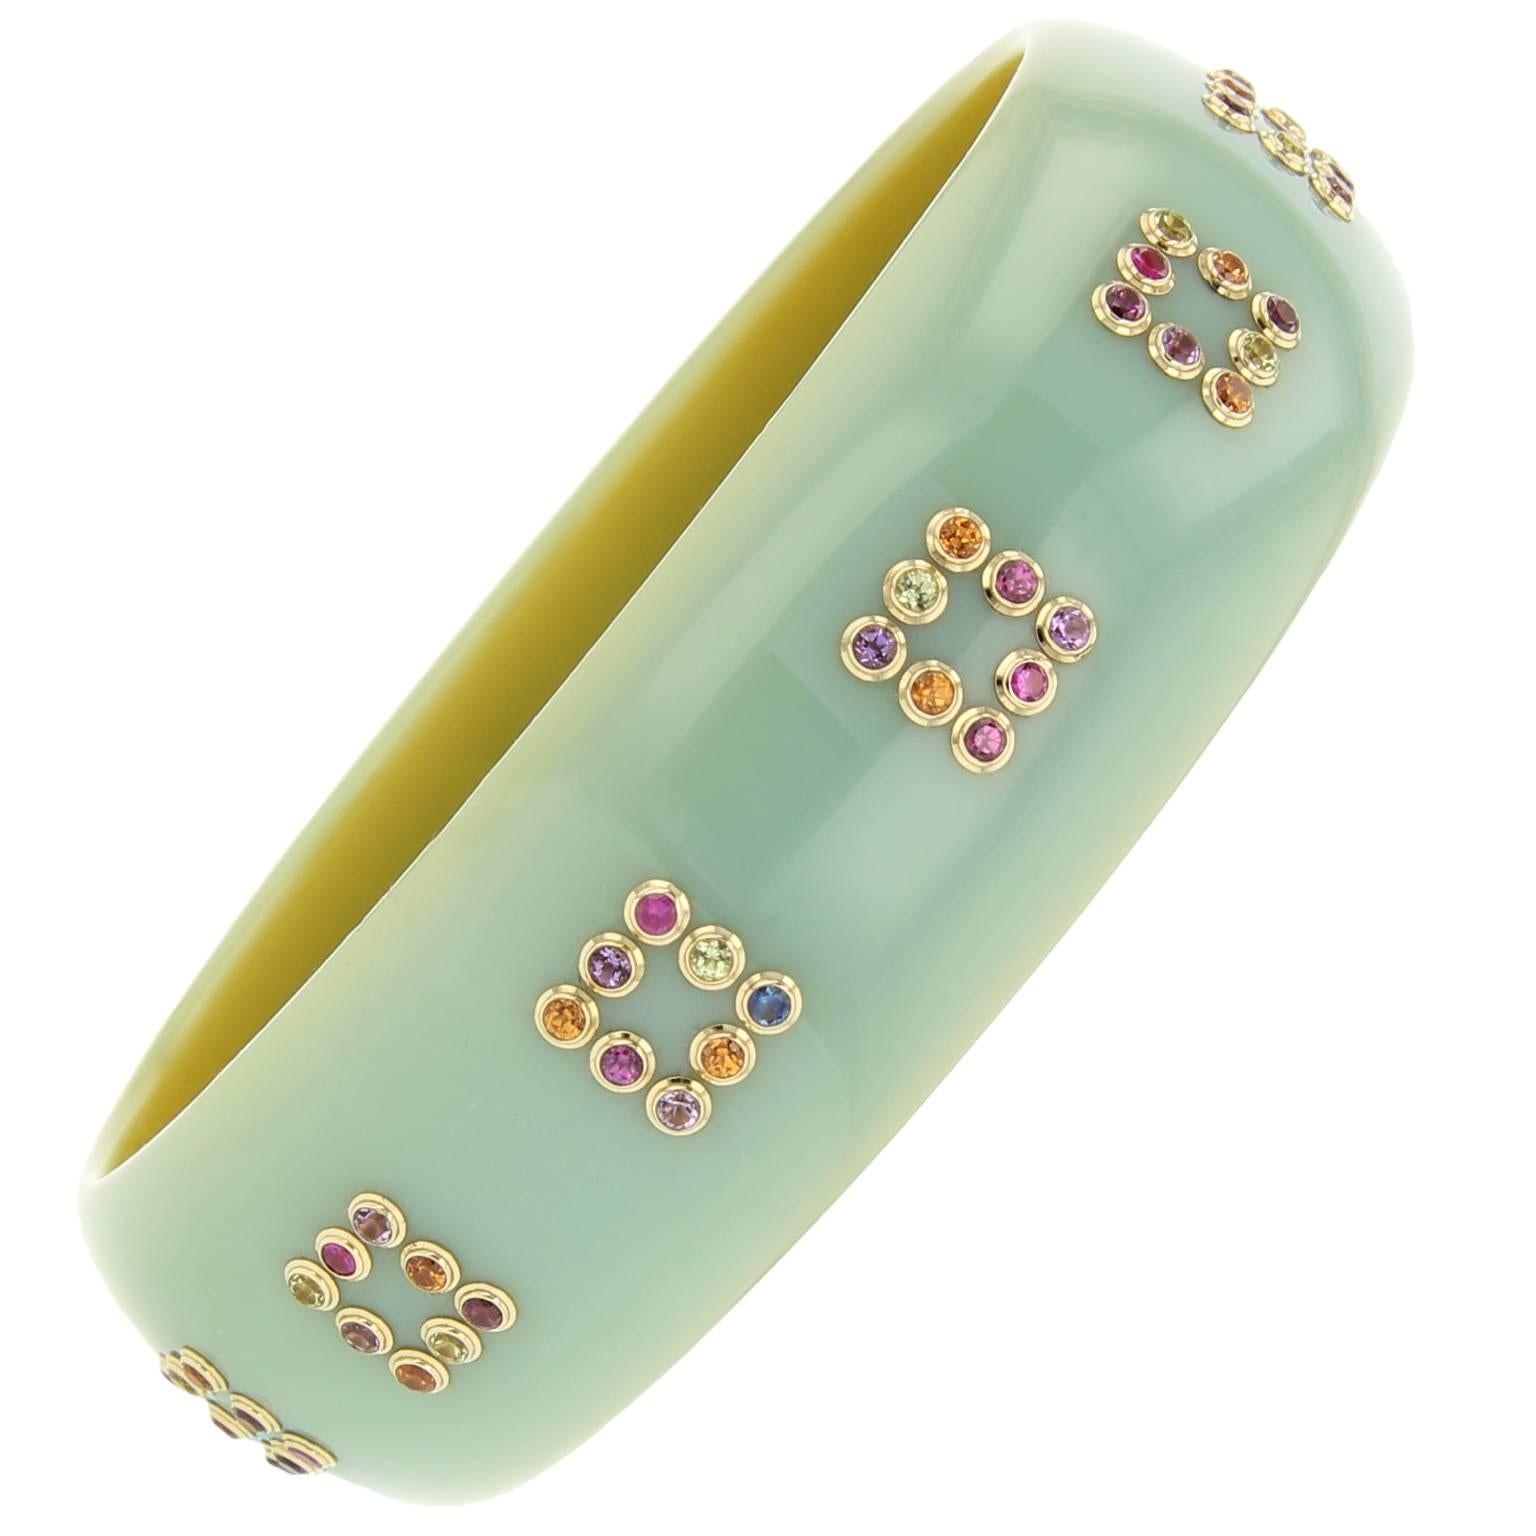 This Mark Davis bangle was handcrafted using unique bluish-green vintage bakelite. Amethyst, peridot, garnet and sapphire set in 18k yellow gold bezels create the square-shaped pattern that rings this truly one-of-a-kind piece.

Full details